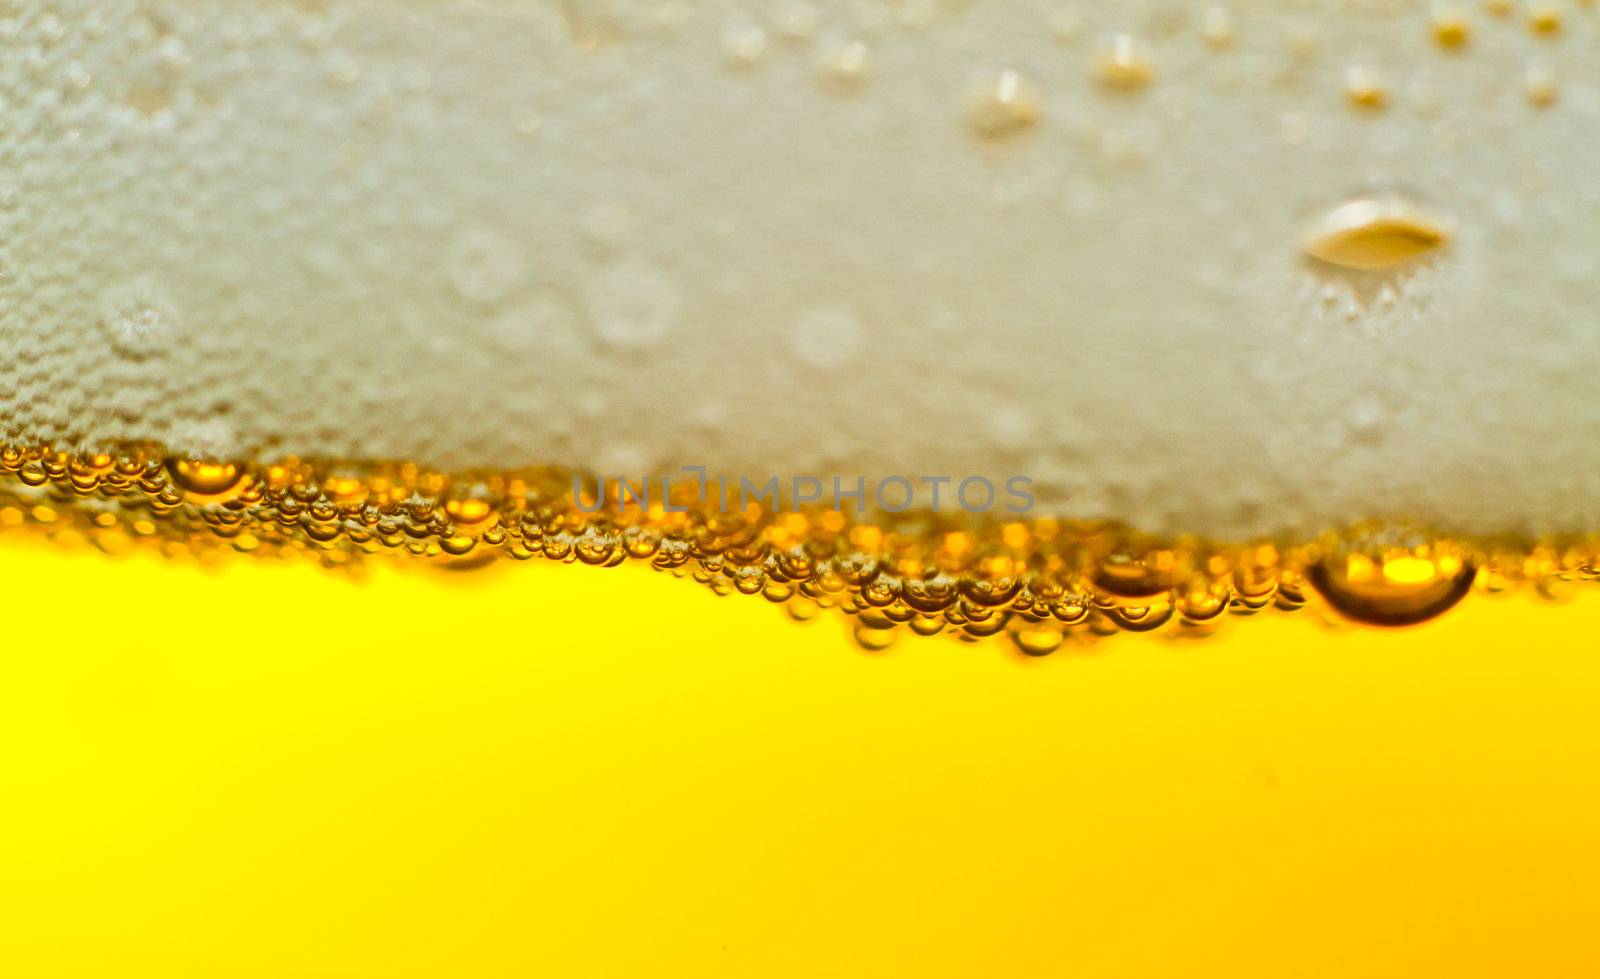 Super close up of the bubbles in beer with plenty of copy space.